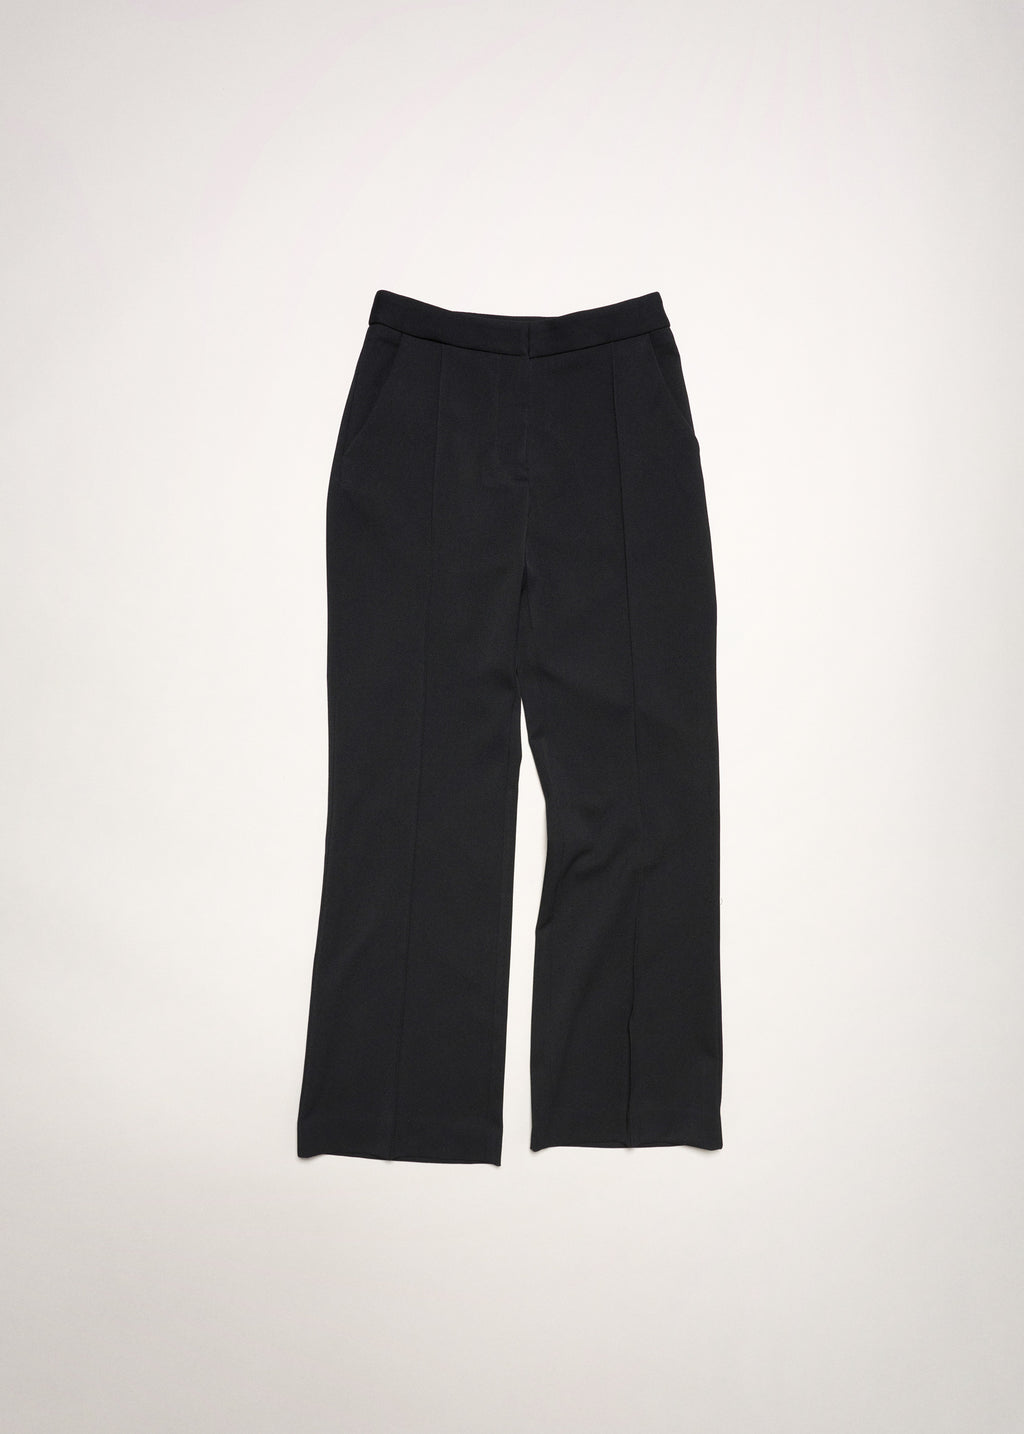 All-Day Flares ~ Black